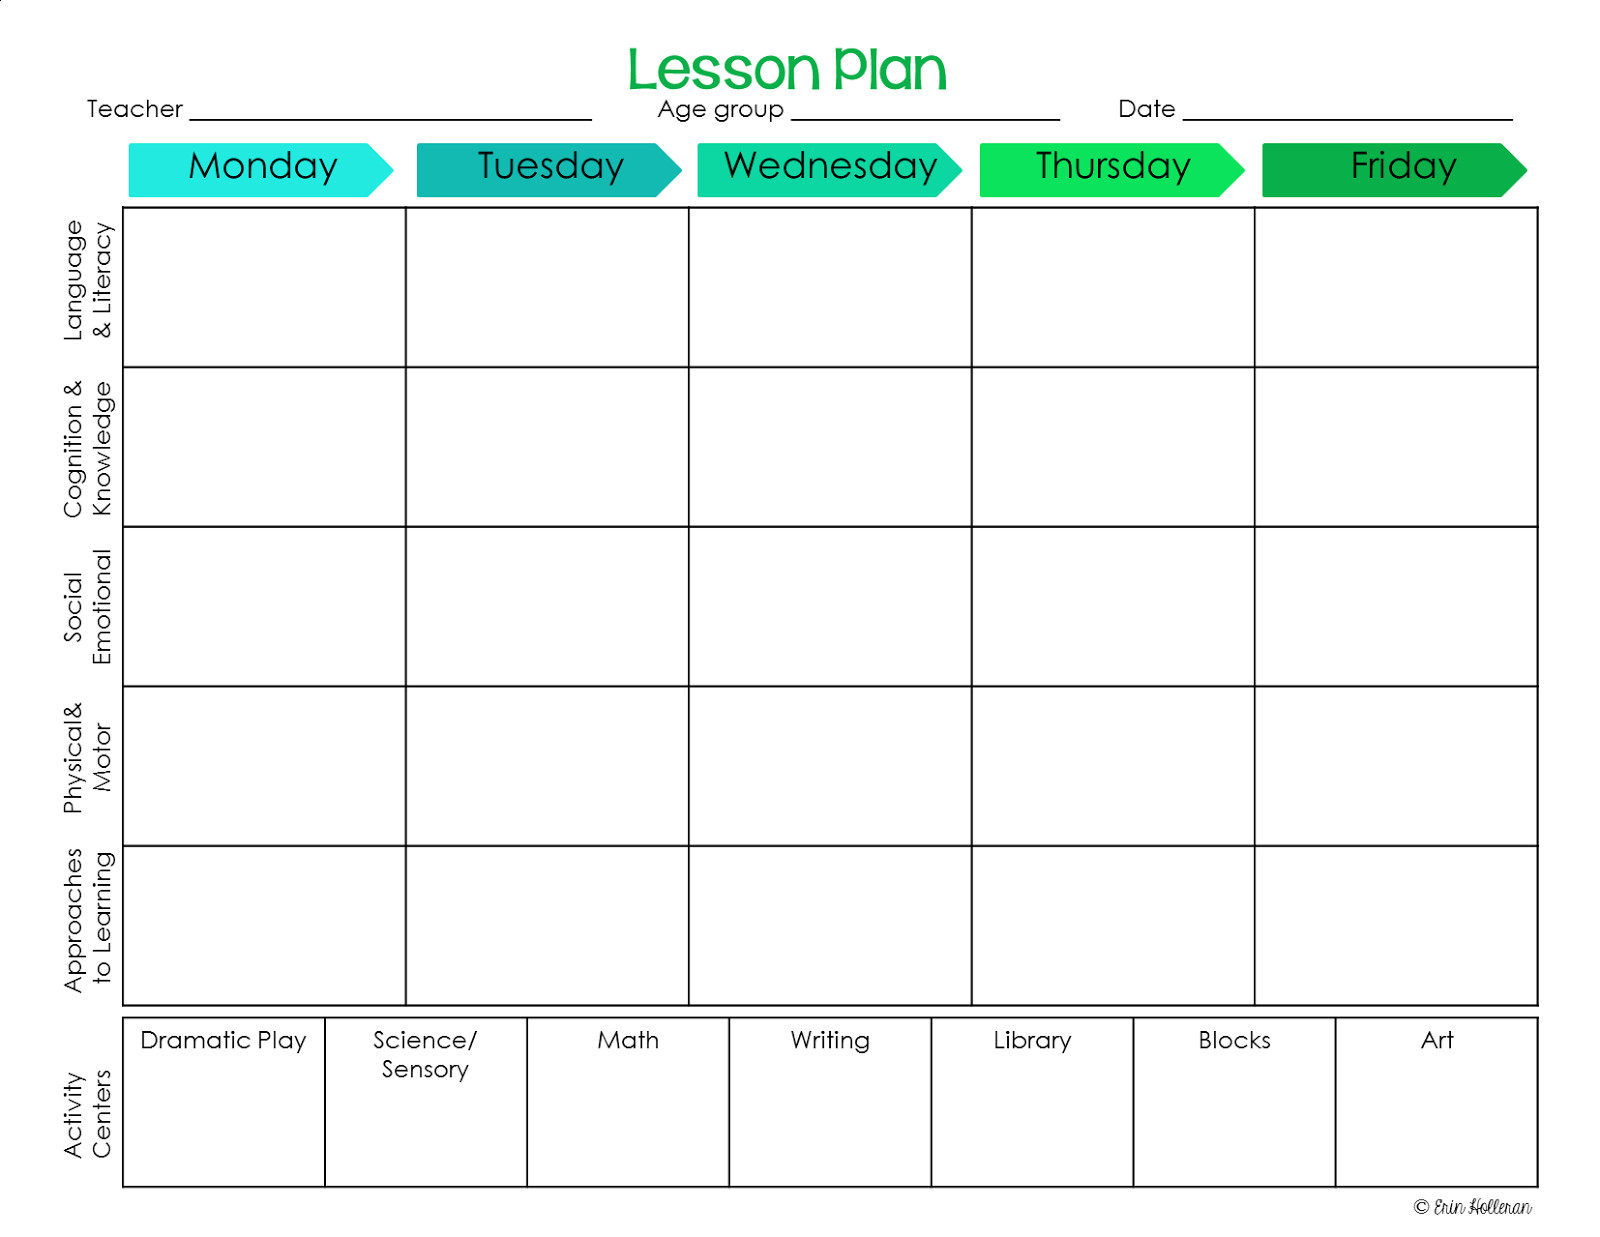 Preschool Daily Lesson Plan Preschool Ponderings Make Your Lesson Plans Work for You